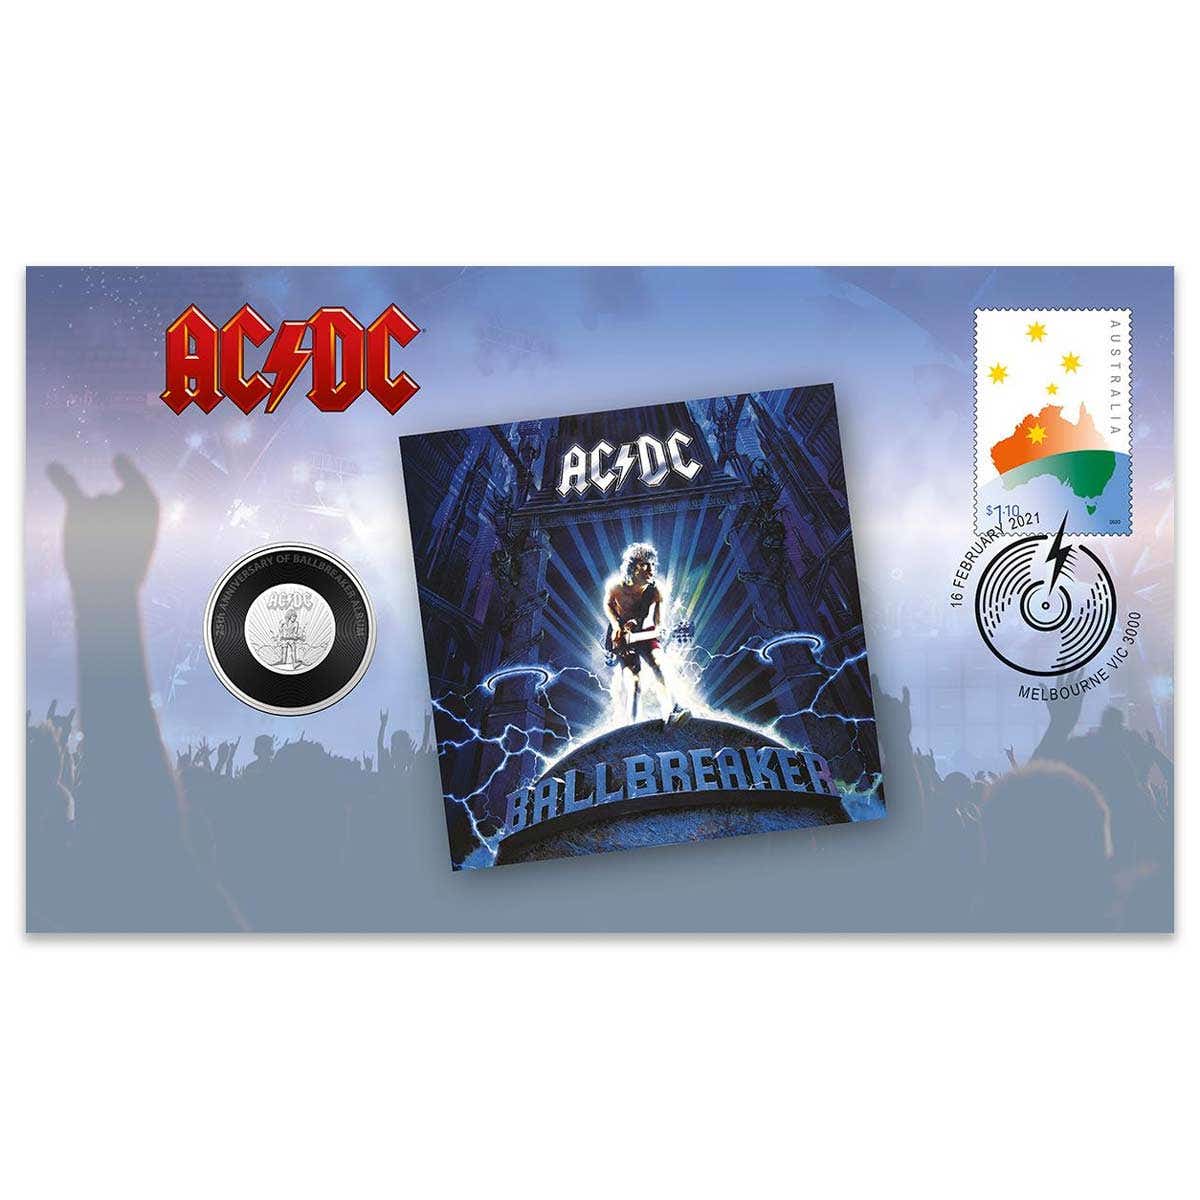 AC/DC Ballbreaker 2020 20c Coin & Stamp Cover